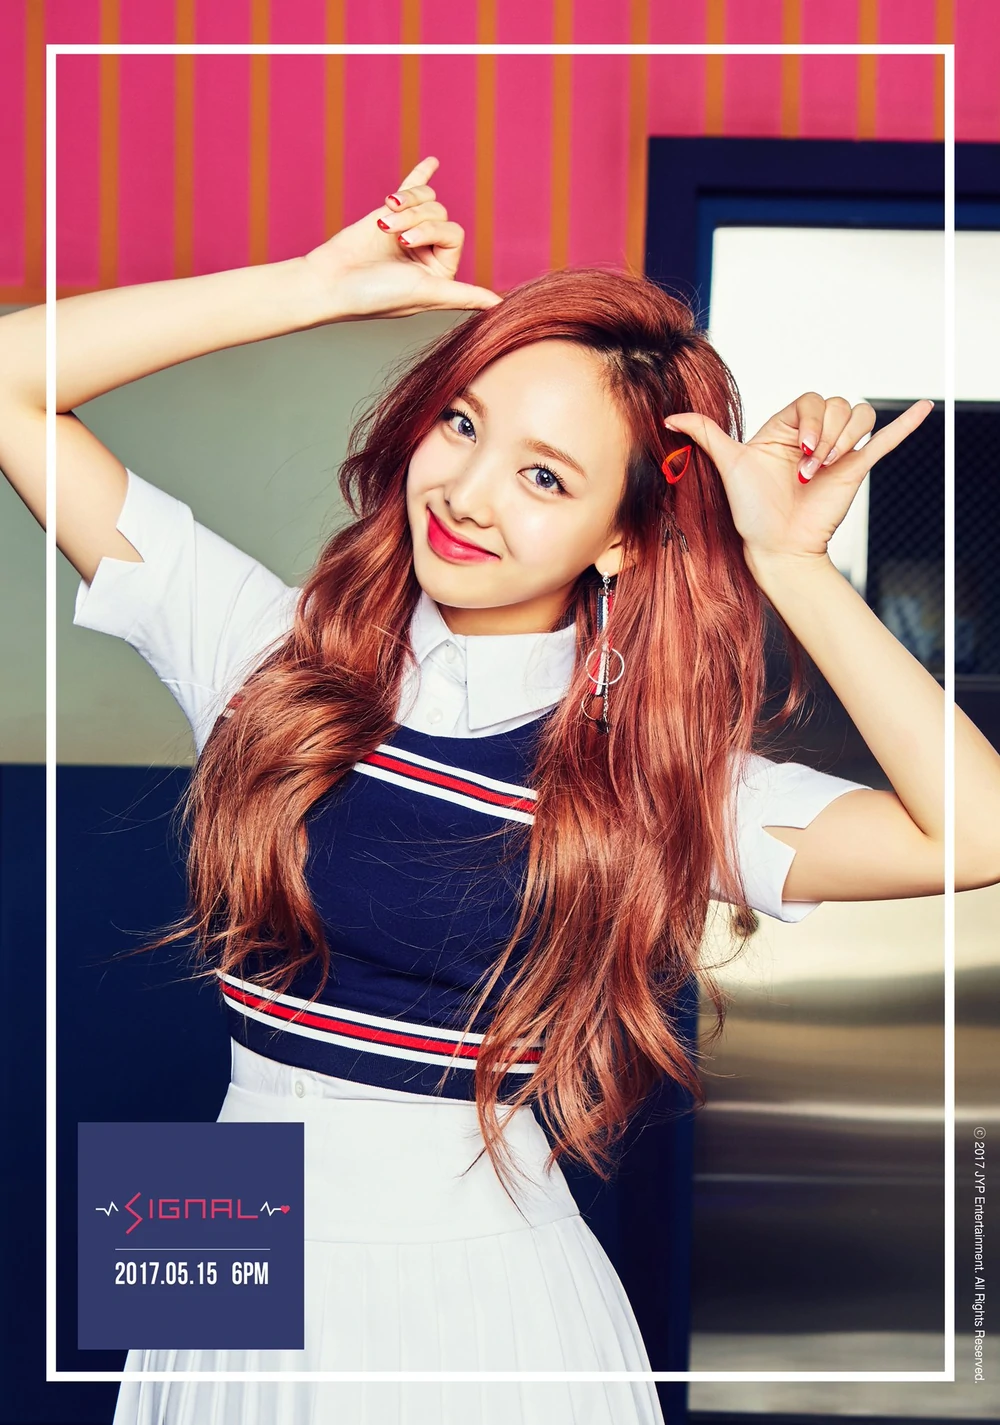 Twice Signal Nayeon Concept Teaser Picture Image Photo Kpop K-Concept 1